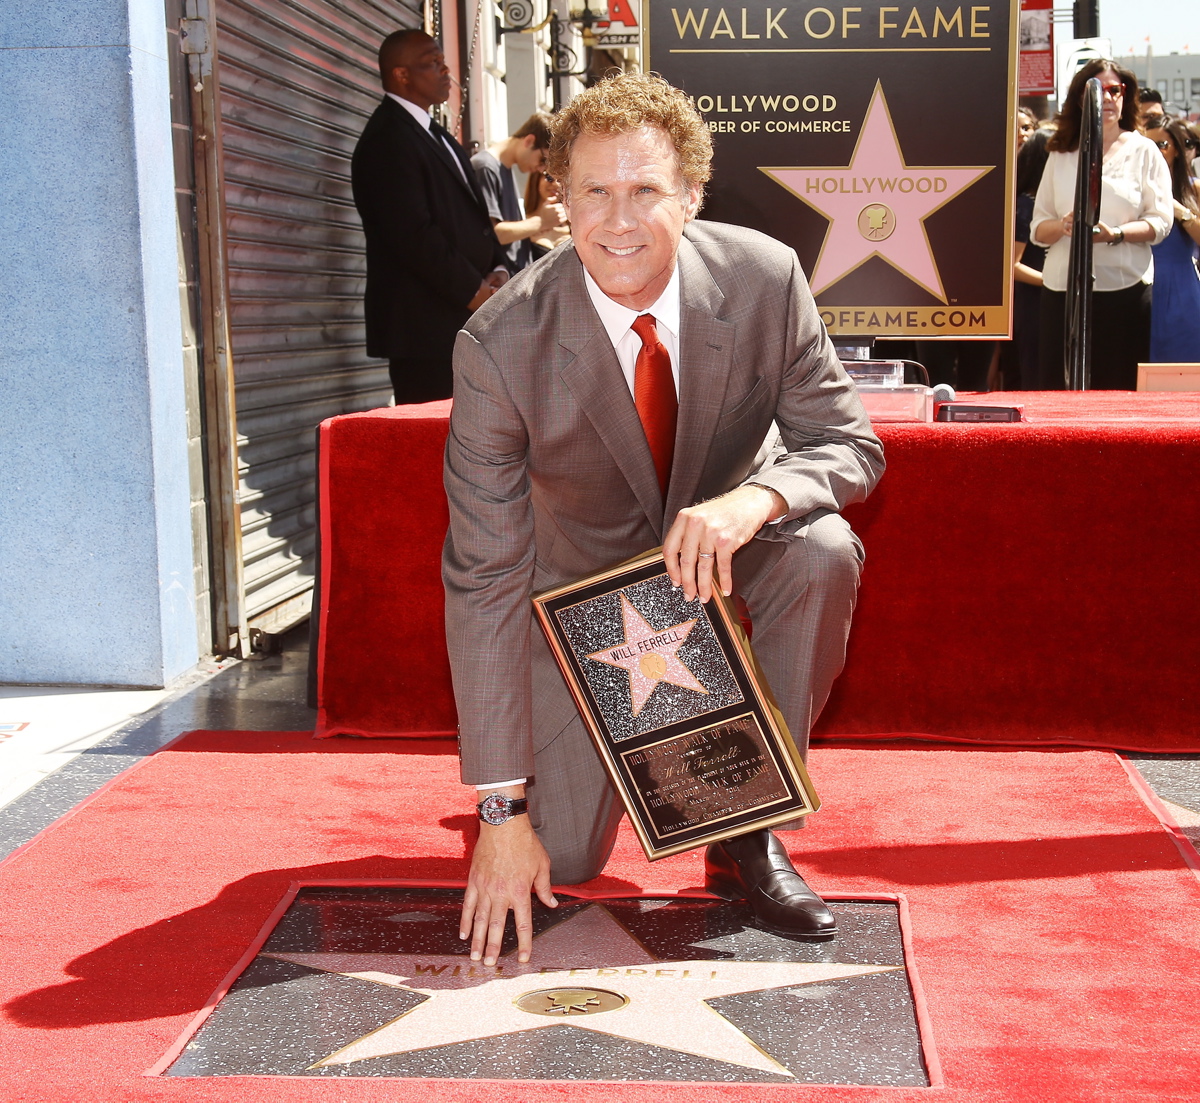 It took long enough but actor Will Ferrell was finally honored with a star on the Hollywood Walk of Fame on March 24, 2015. Ferrell has starred in numerous movies including 